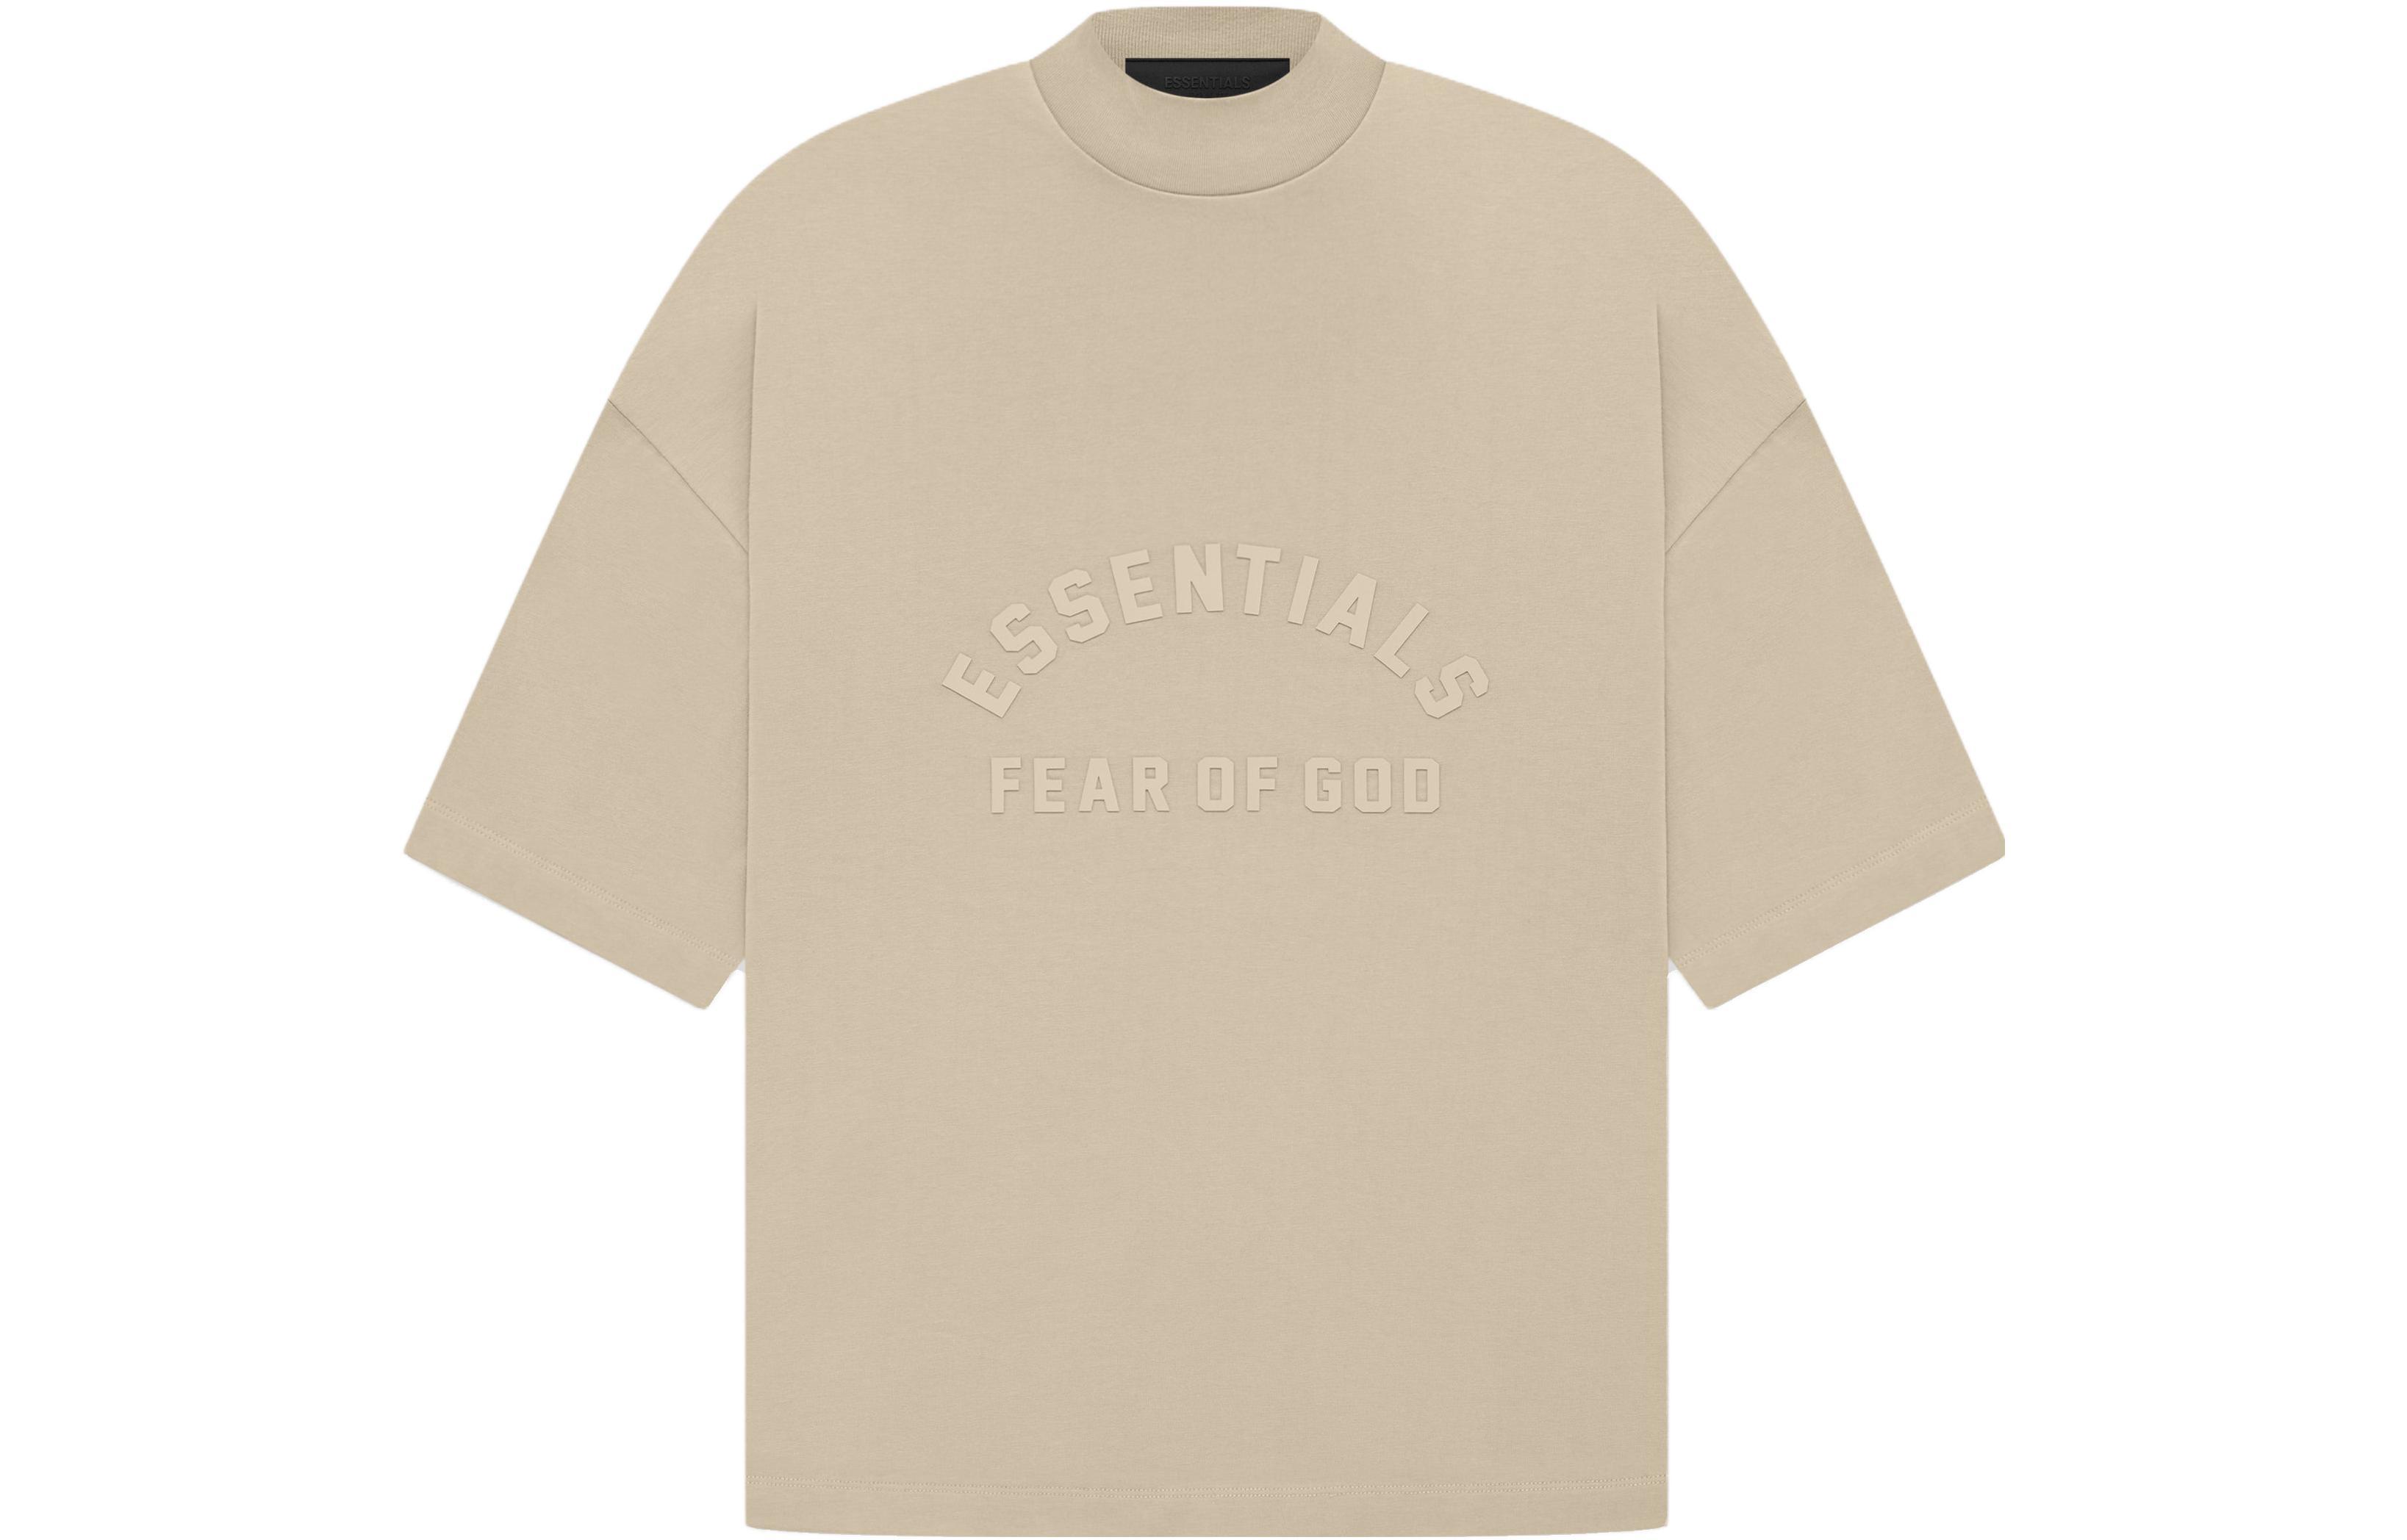 Fear of God Essentials SS23 The Dusty Beige Collection Essentials Tee Dusty Beige T